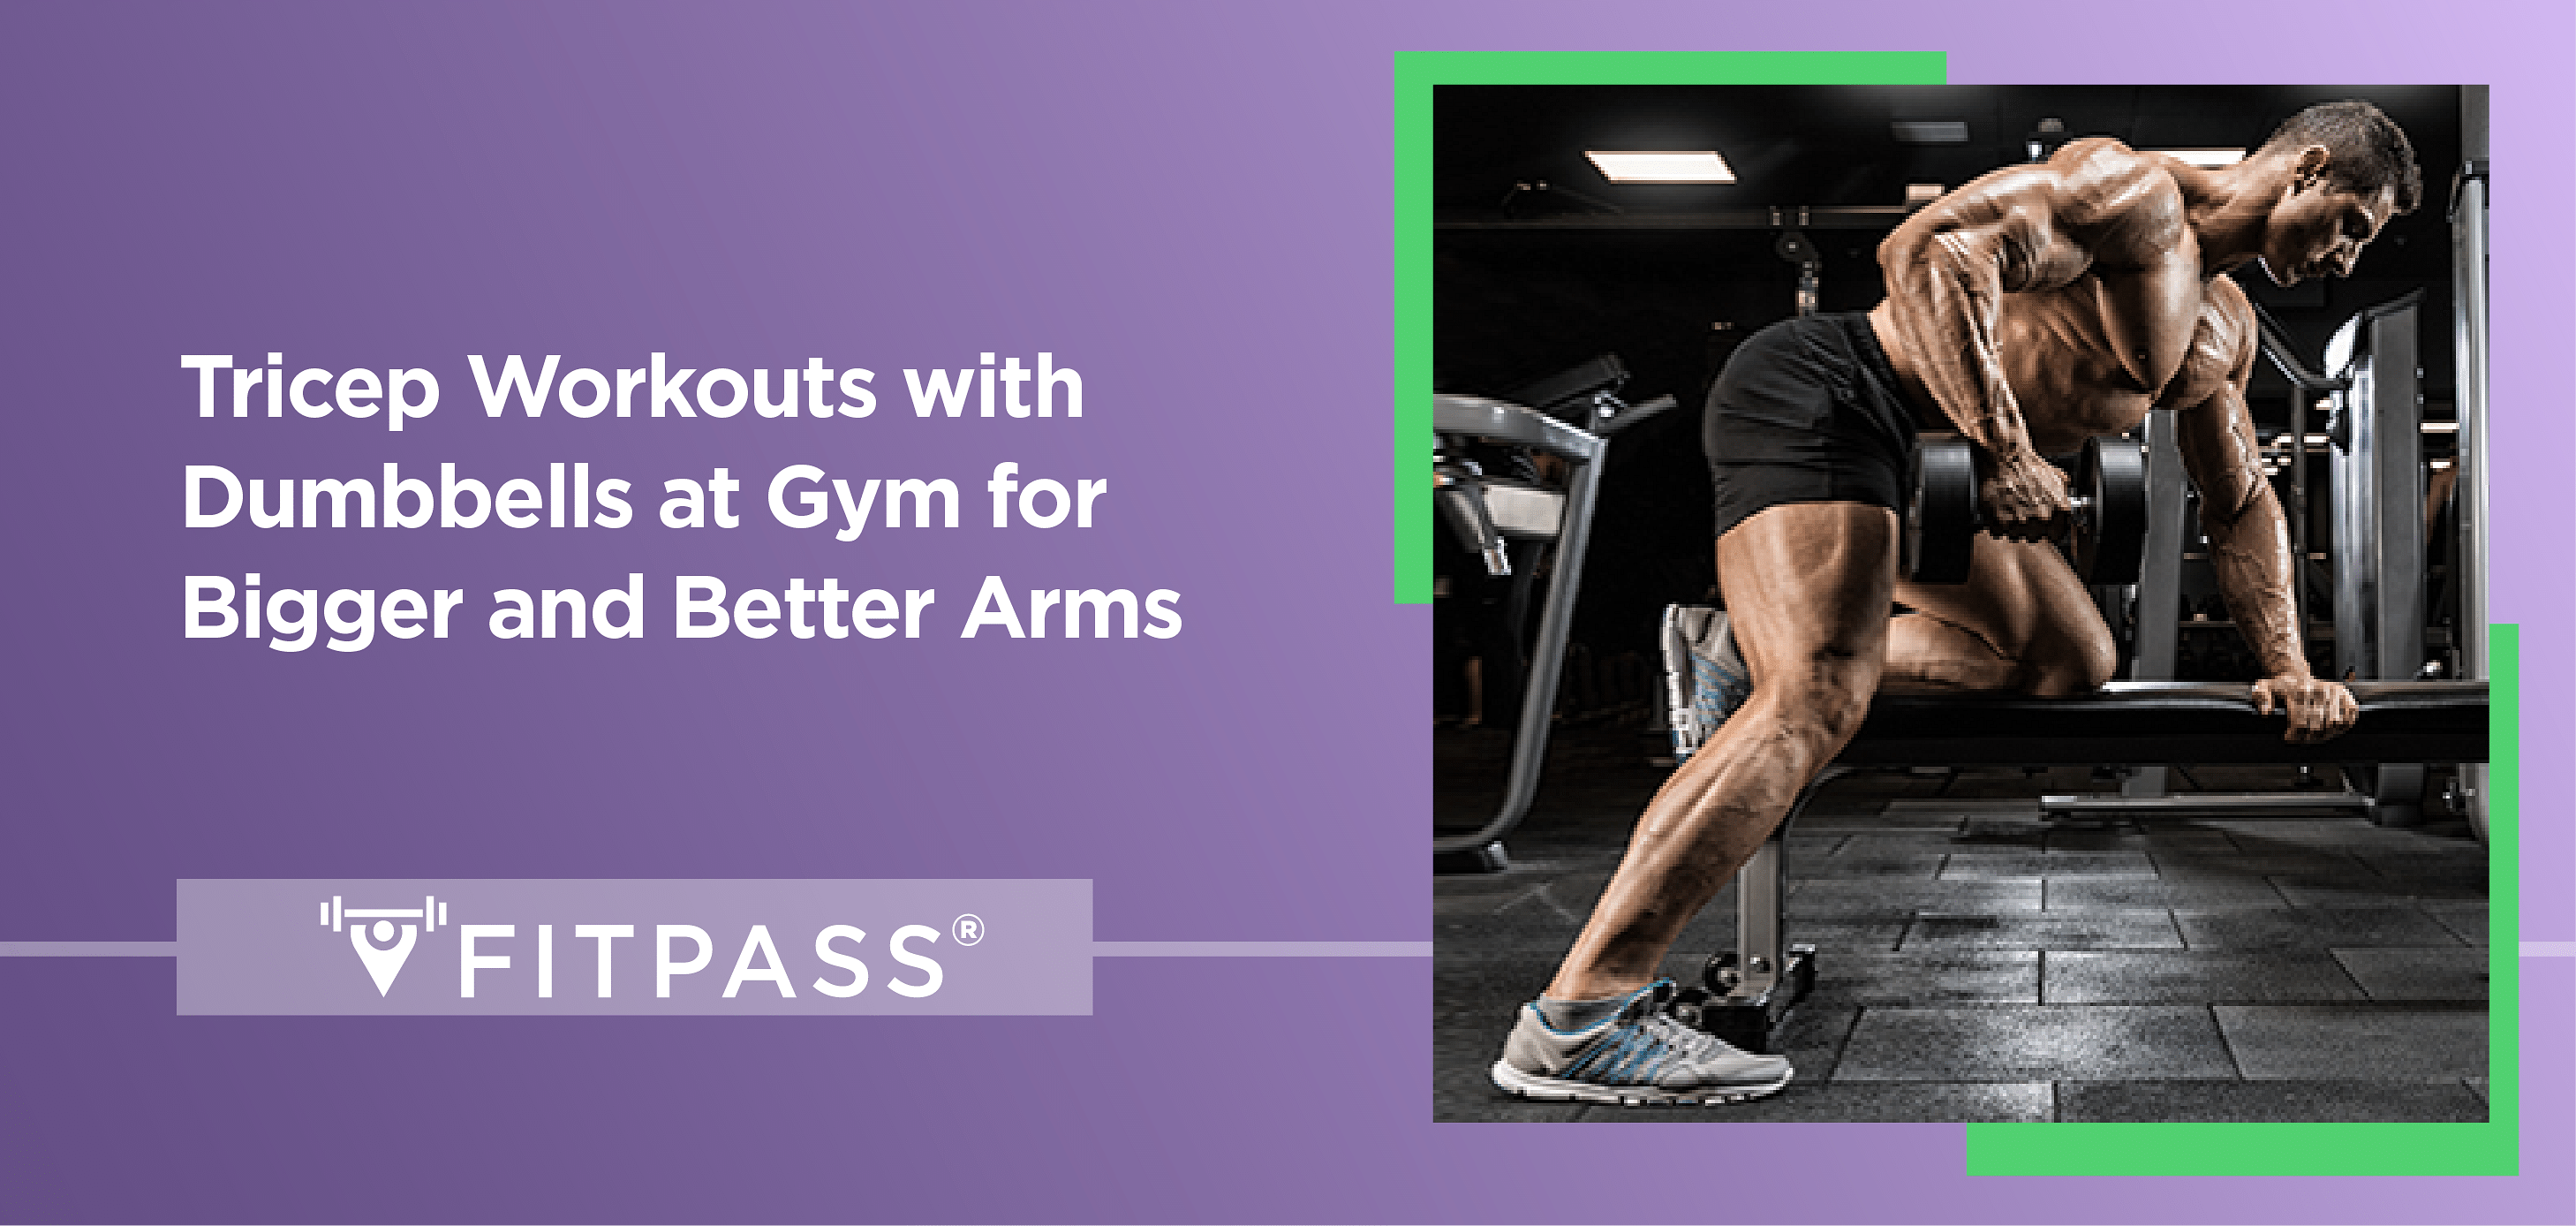 Tricep Workouts with Dumbbells at Gym for Bigger and Better Arms